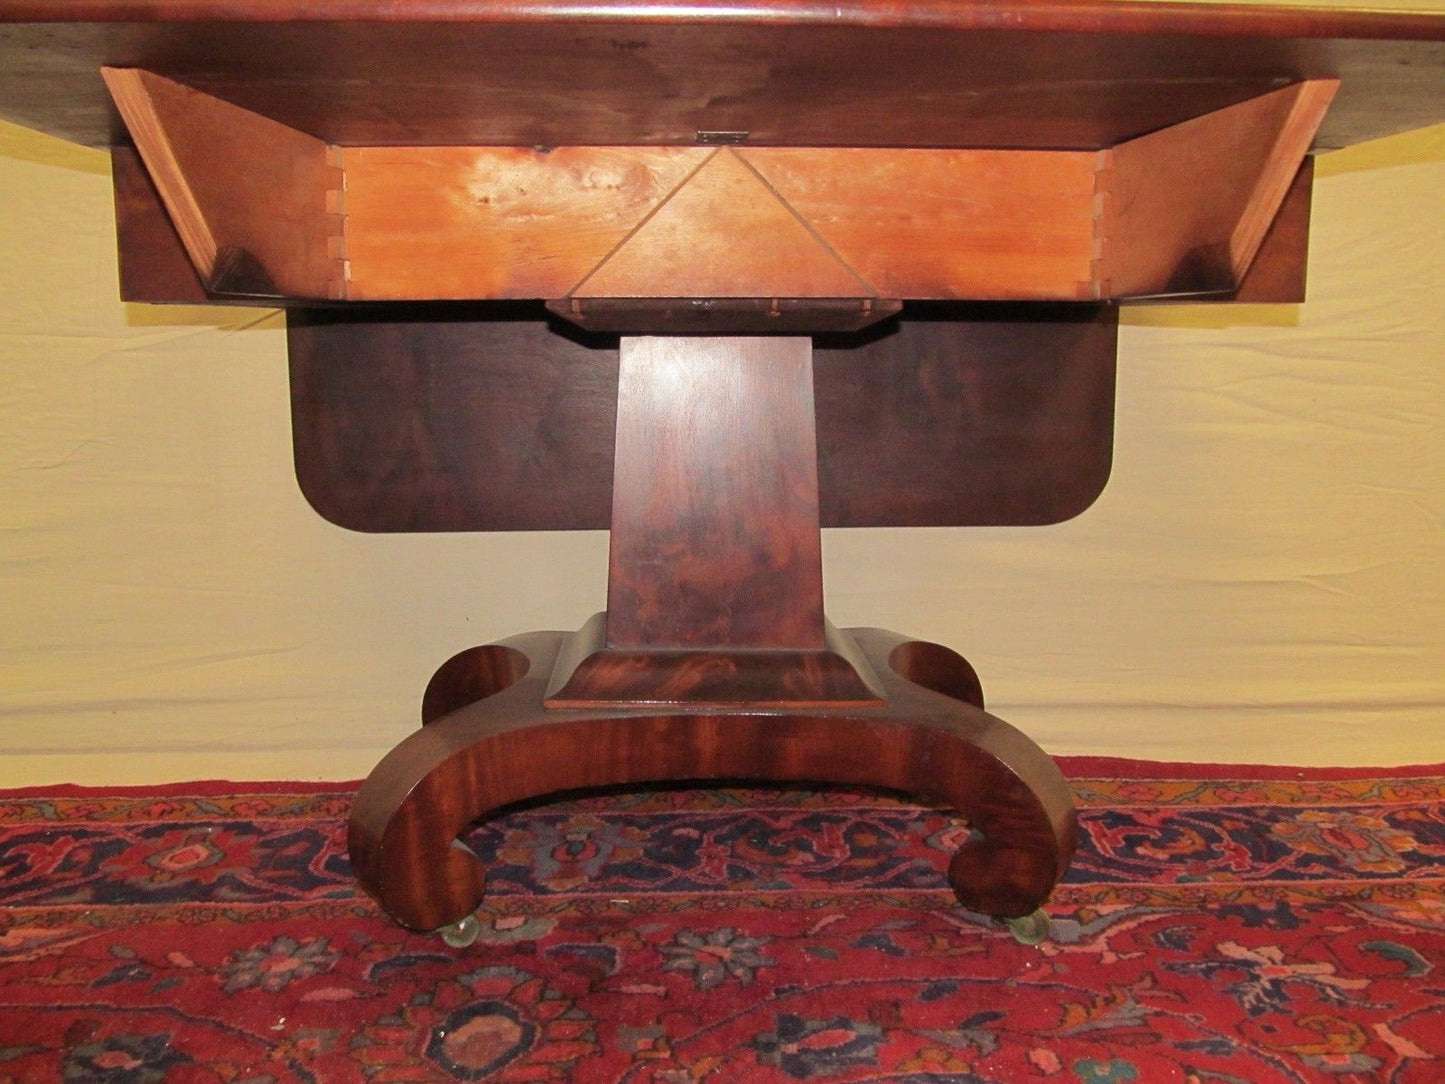 EXCEPTIONAL EMPIRE MAHOGANY BREAKFAST TABLE ON FINELY FORMED OGEE BASE